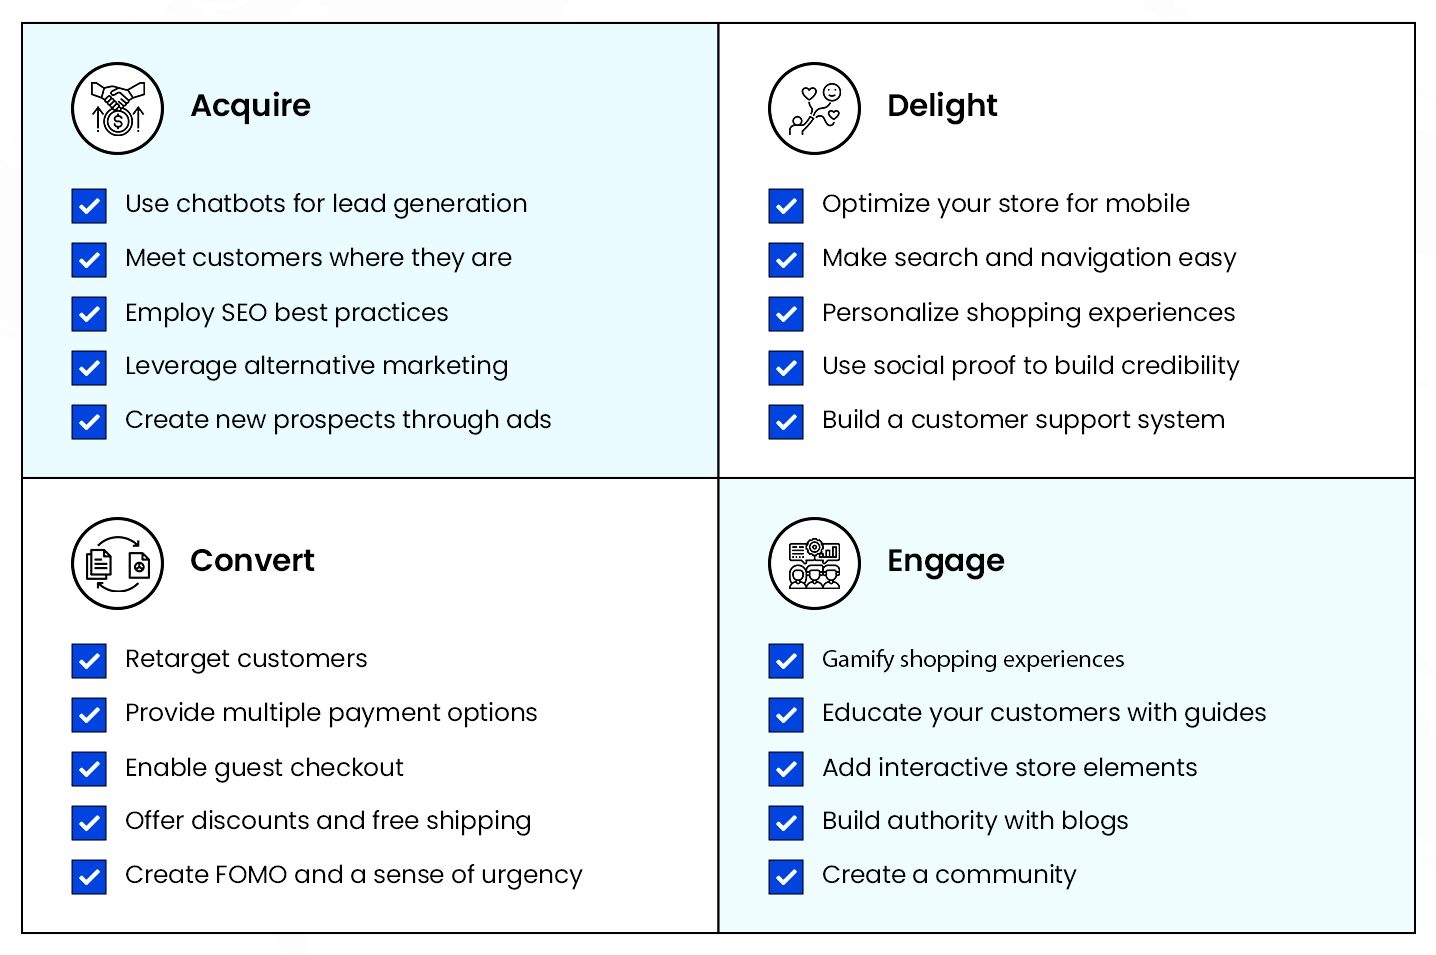 Innovative tactics that can be used to optimize the four stages of a customer’s online shopping journey 